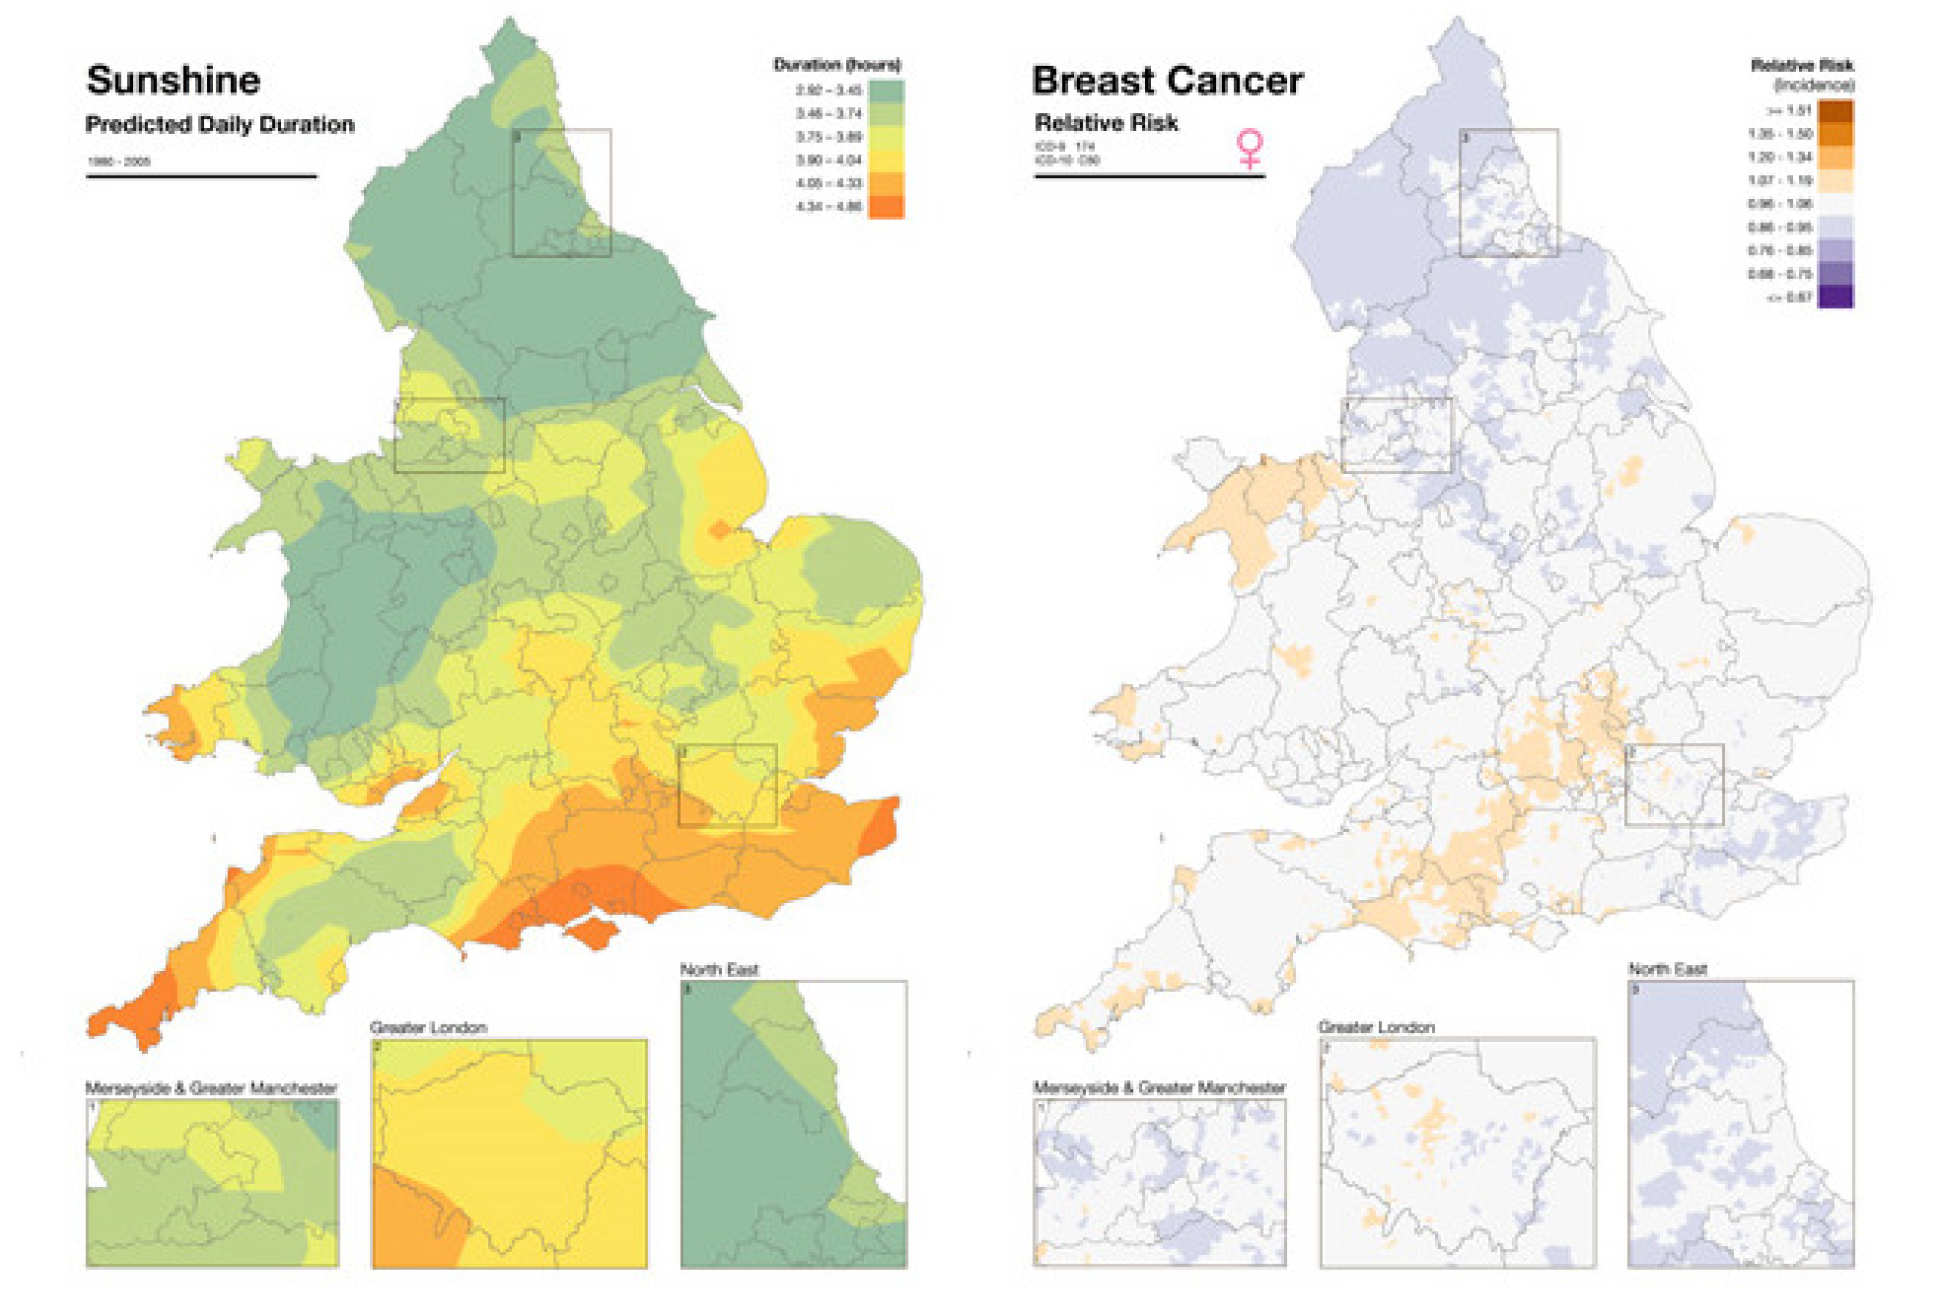 Atlast maps of sunshine duration and relative risk of breast cancer for the England and wales